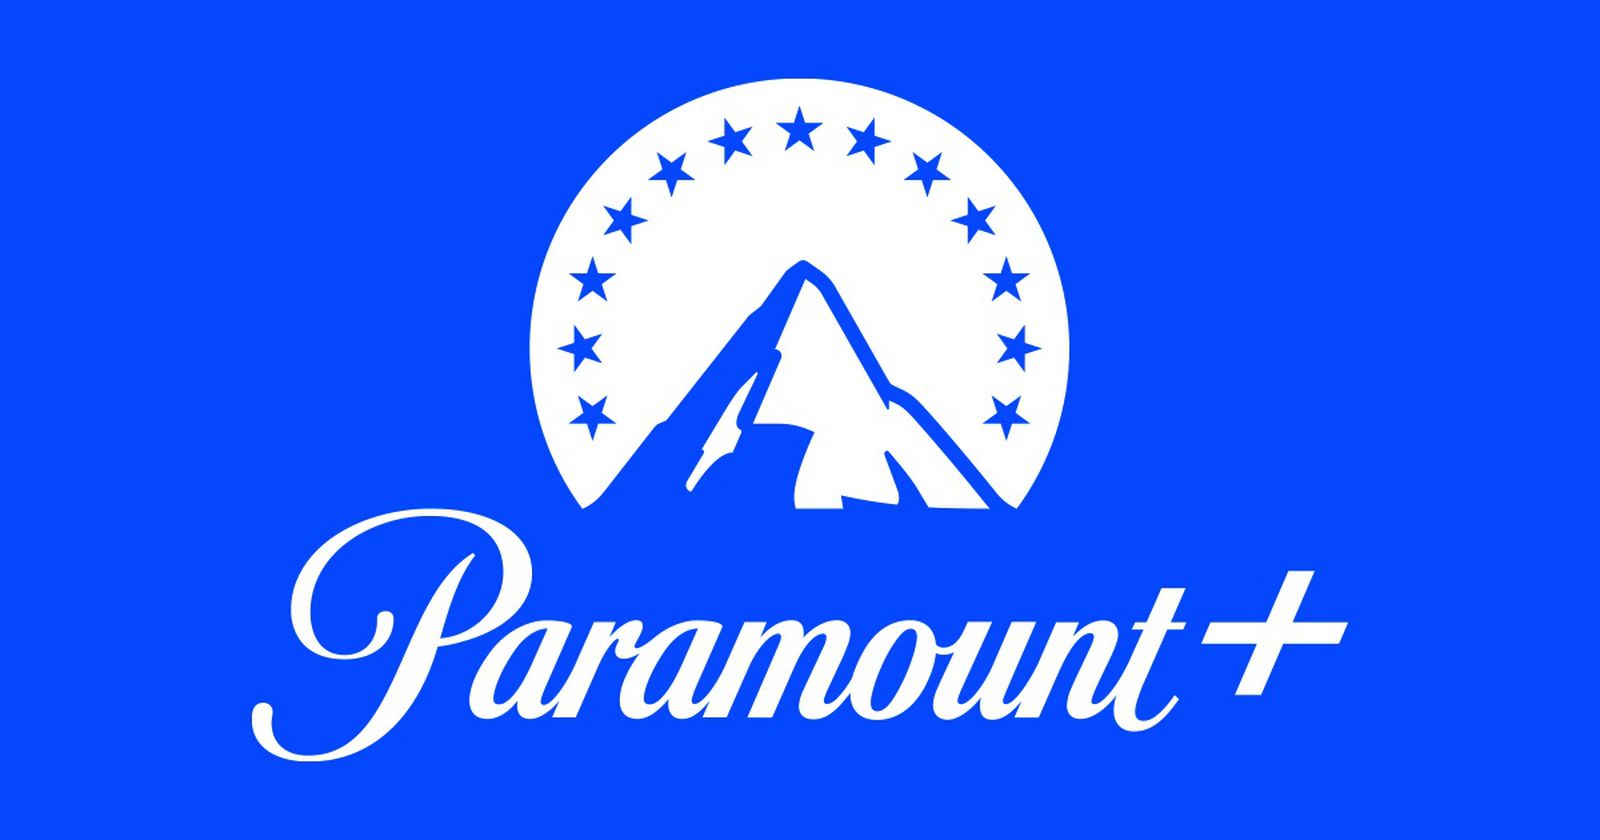 Deals: New Customers Can Get Their First Month of Paramount+ Free For a Limited Time - macrumors.com